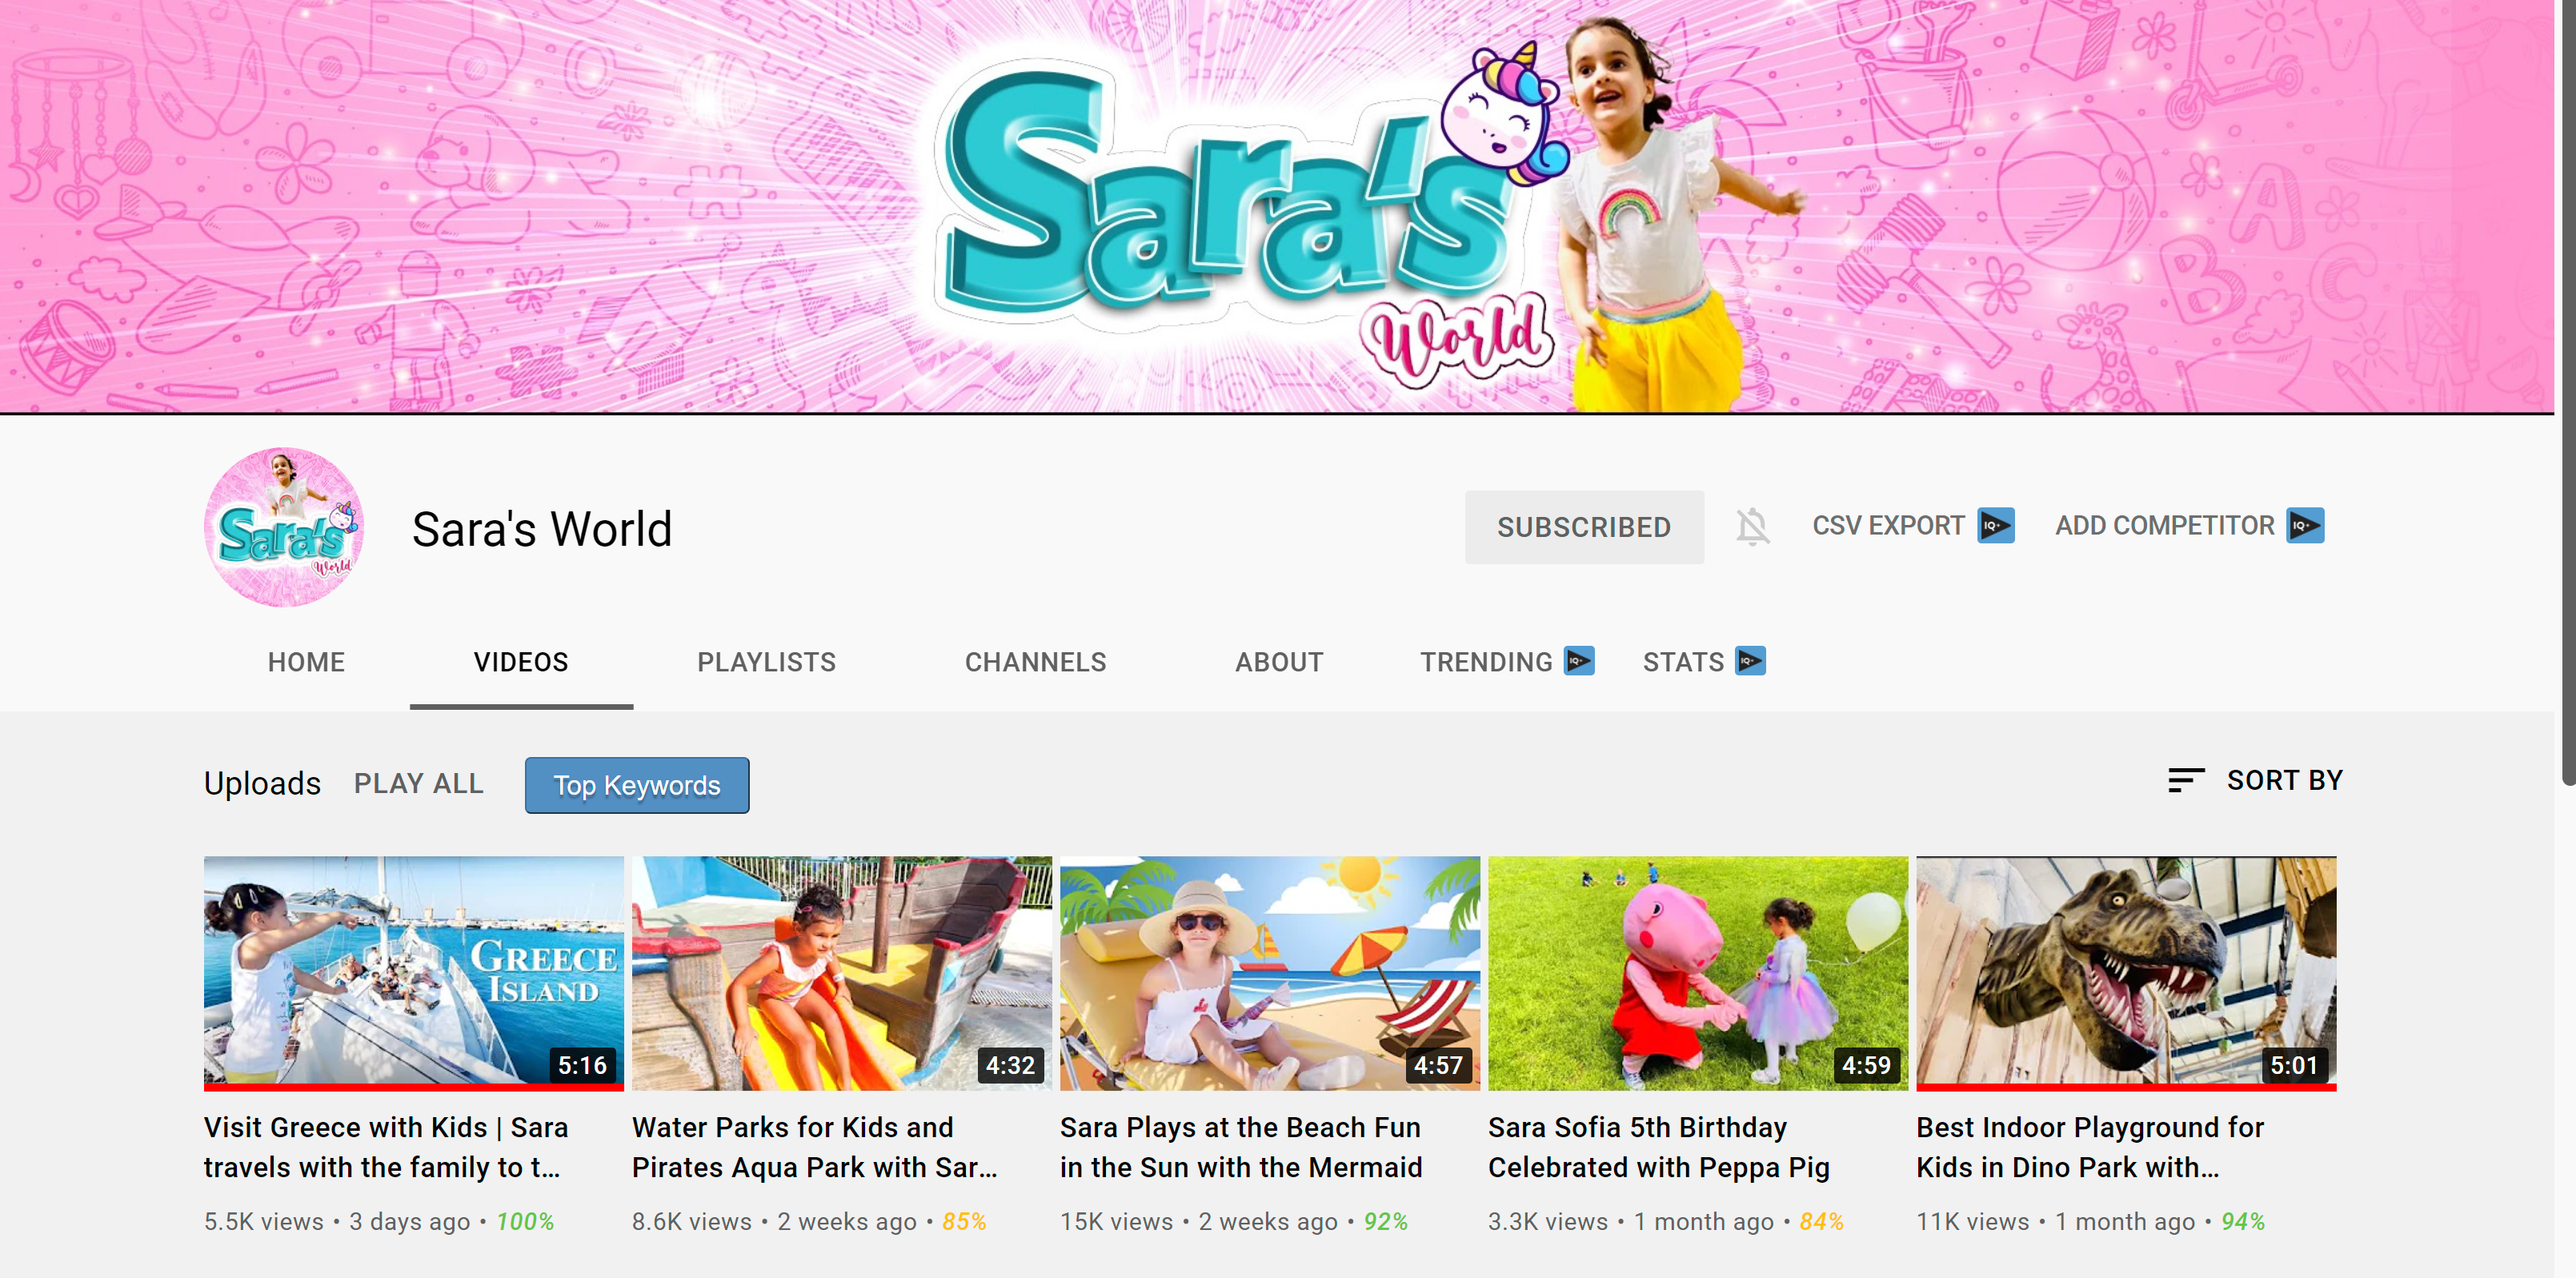 Sara's World YouTube Channel Comes with New Videos for Kids each Week